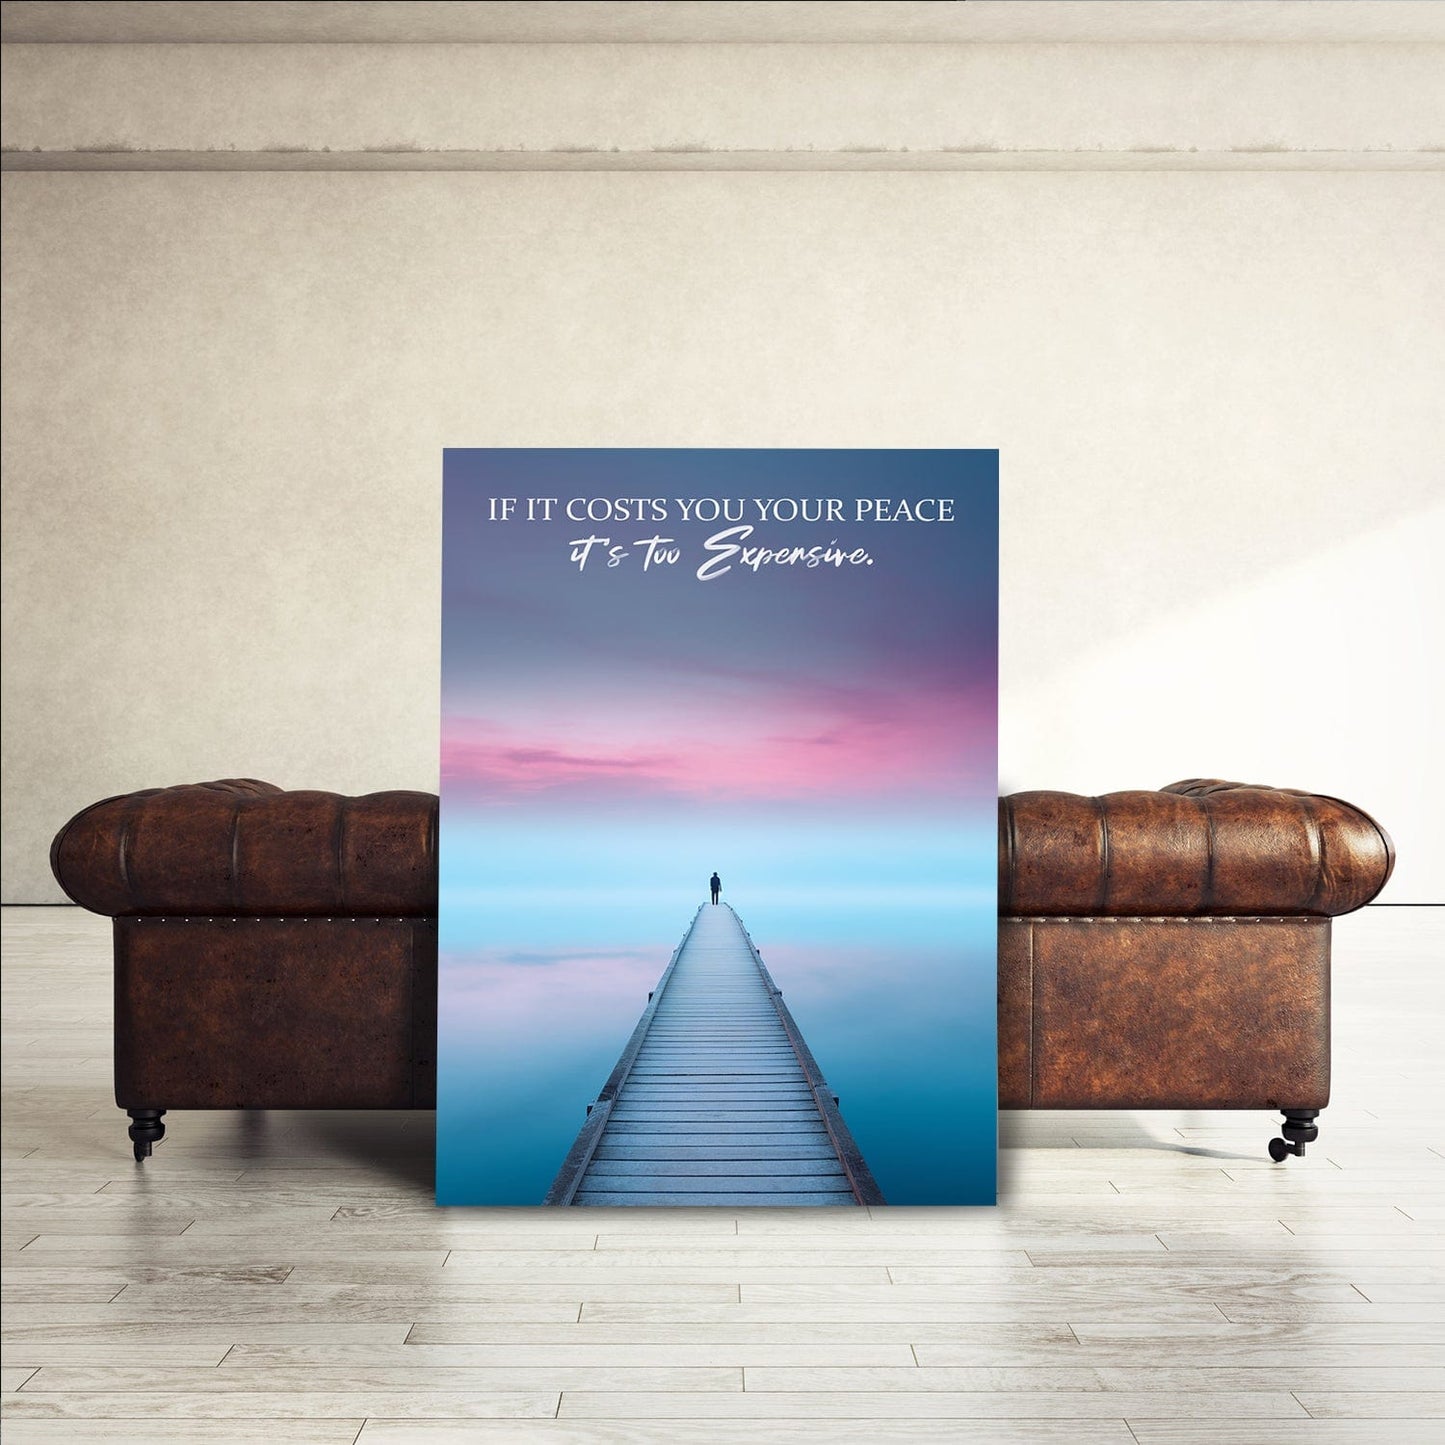 If it costs you your peace it's too expensive Wall Art | Inspirational Wall Art Motivational Wall Art Quotes Office Art | ImpaktMaker Exclusive Canvas Art Portrait